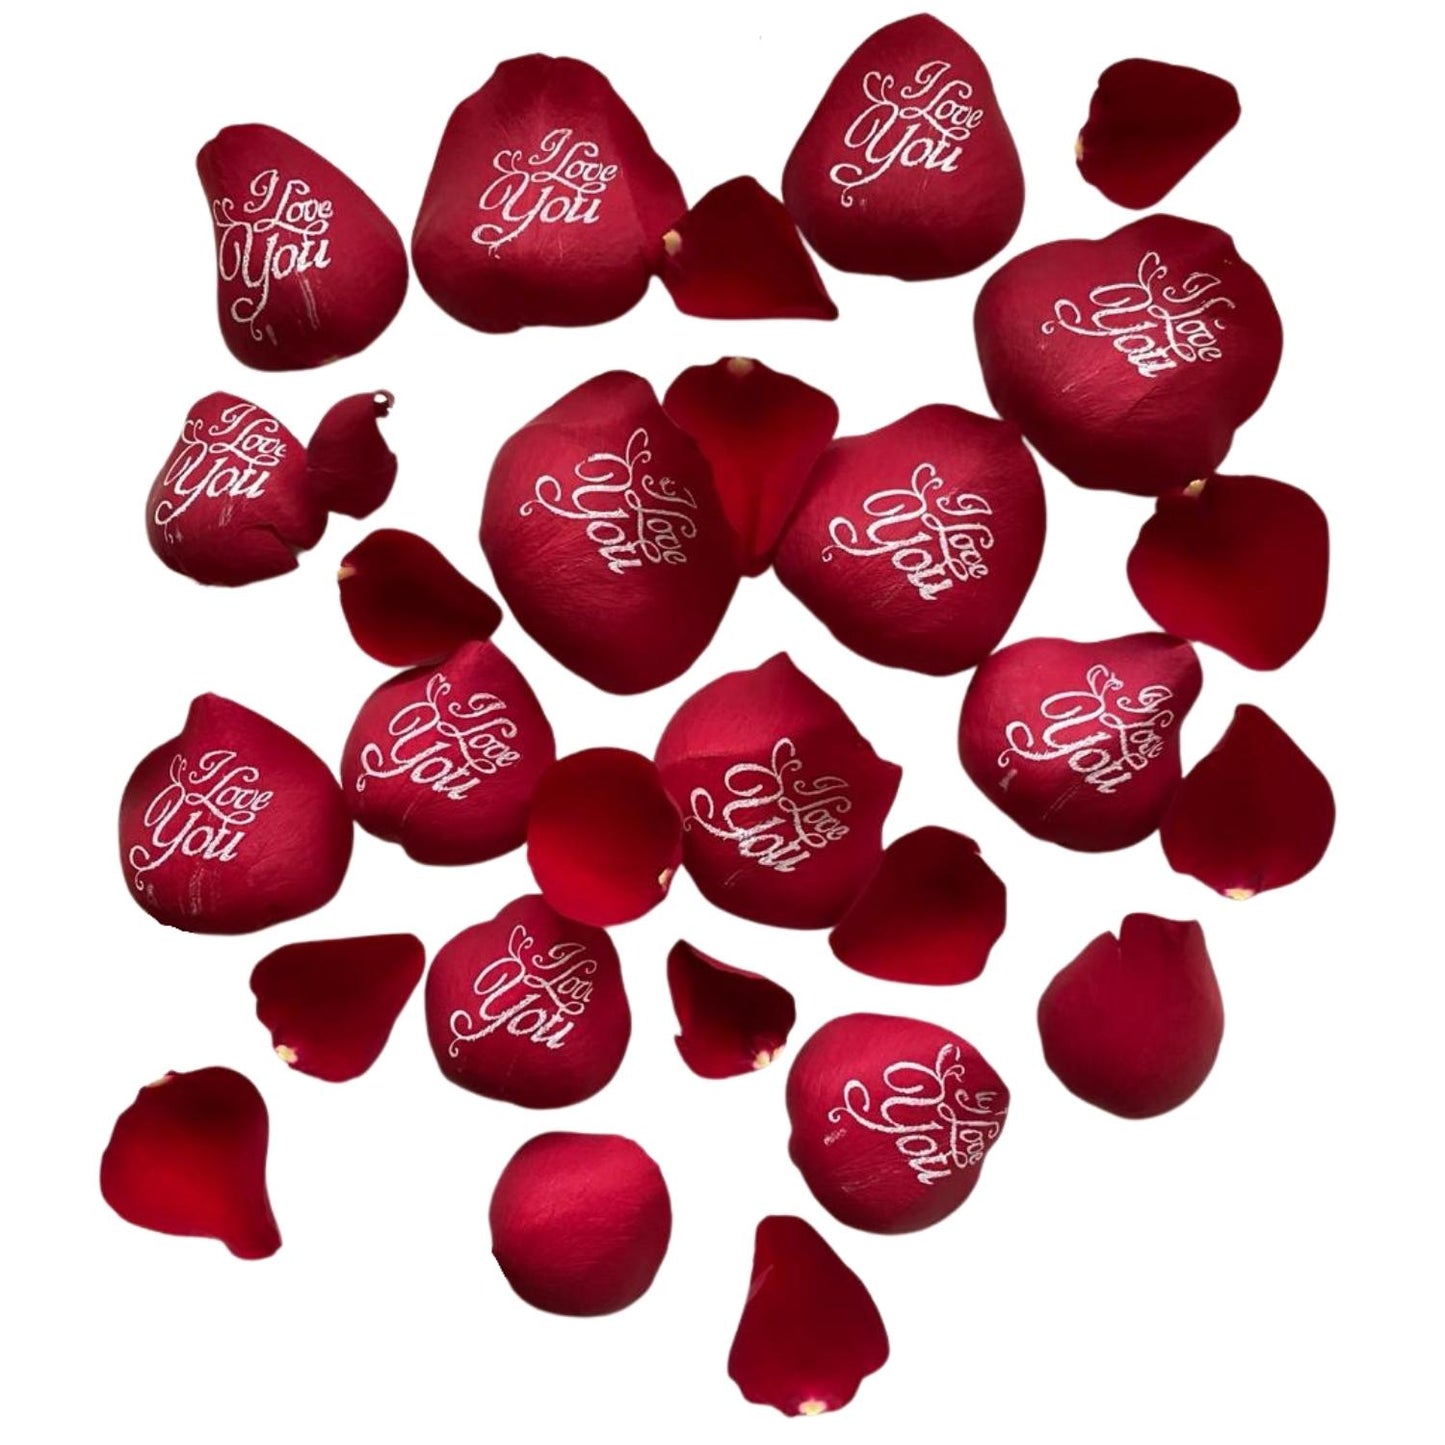 Personalized Rose Petals